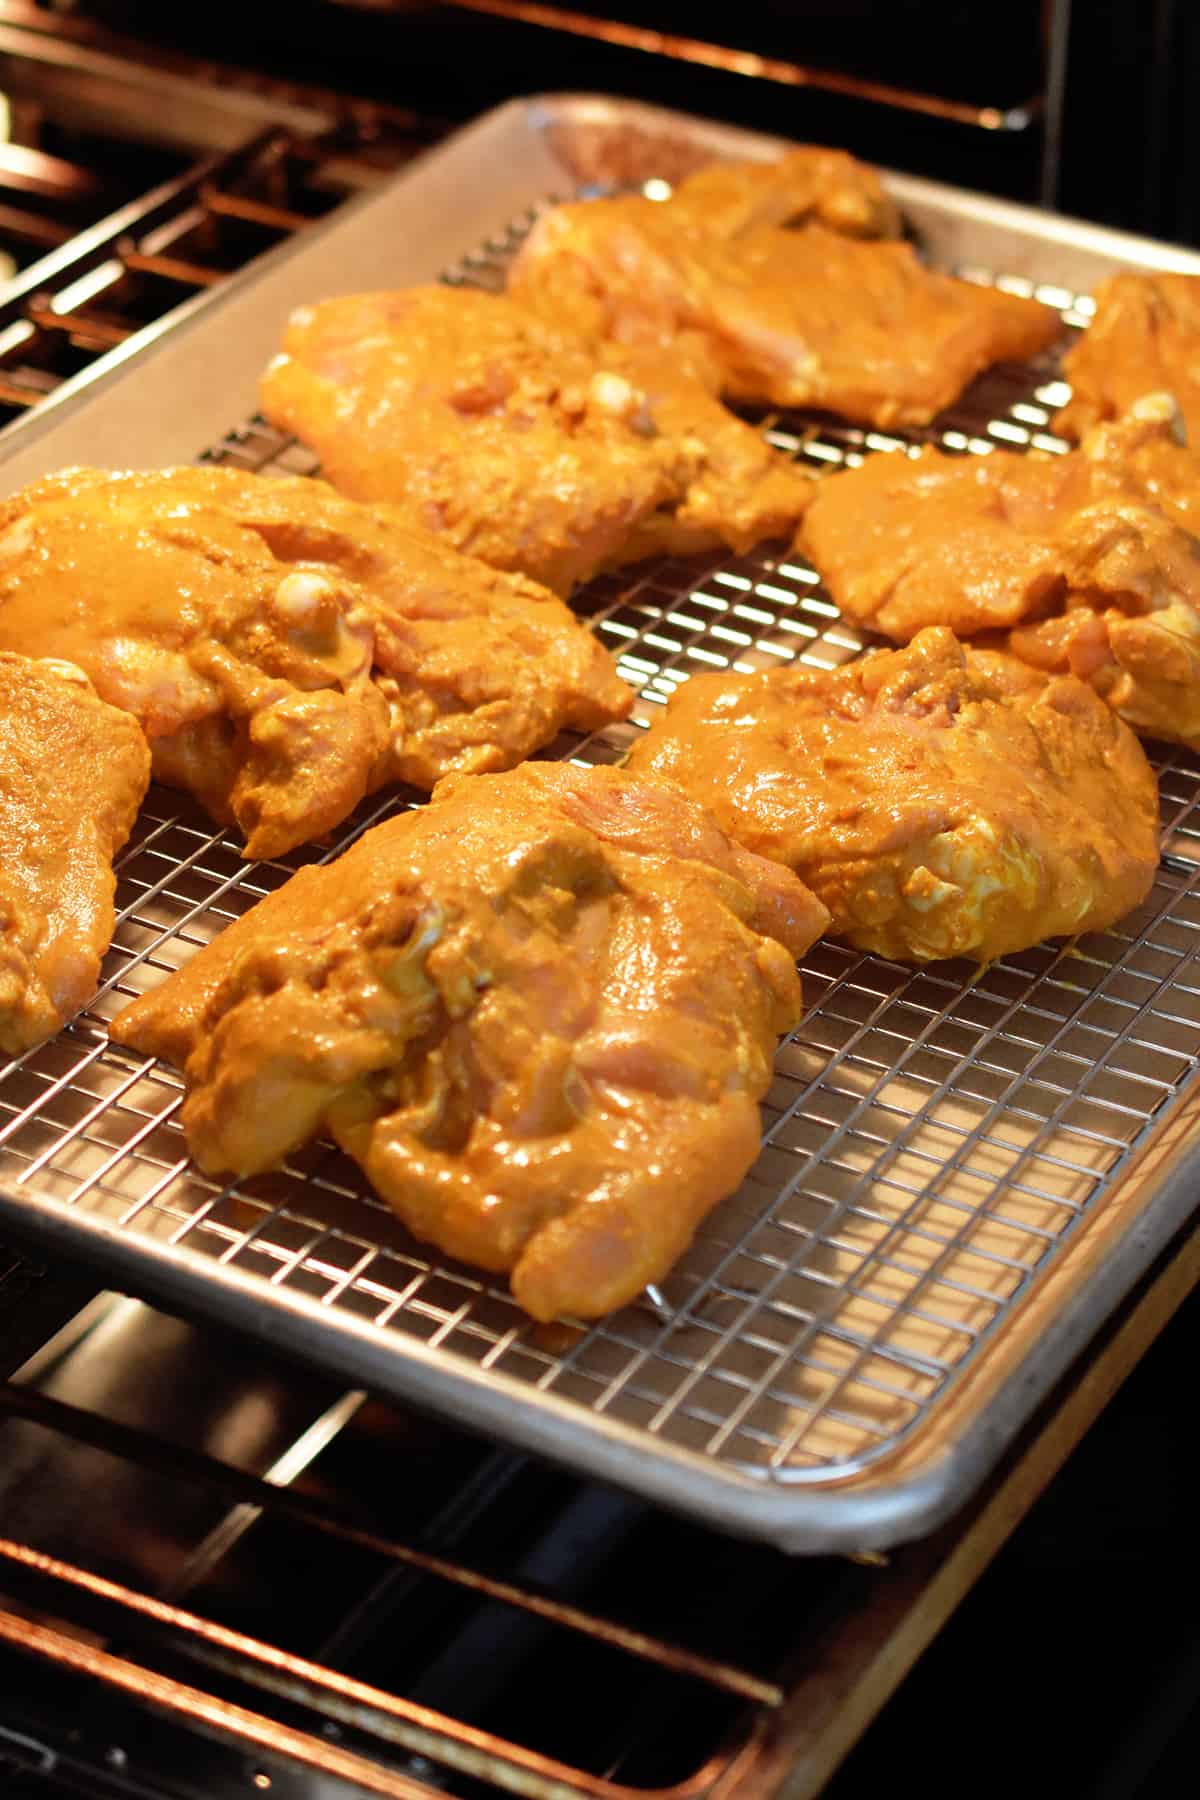 A tray of tandoori chicken is placed in an open oven.